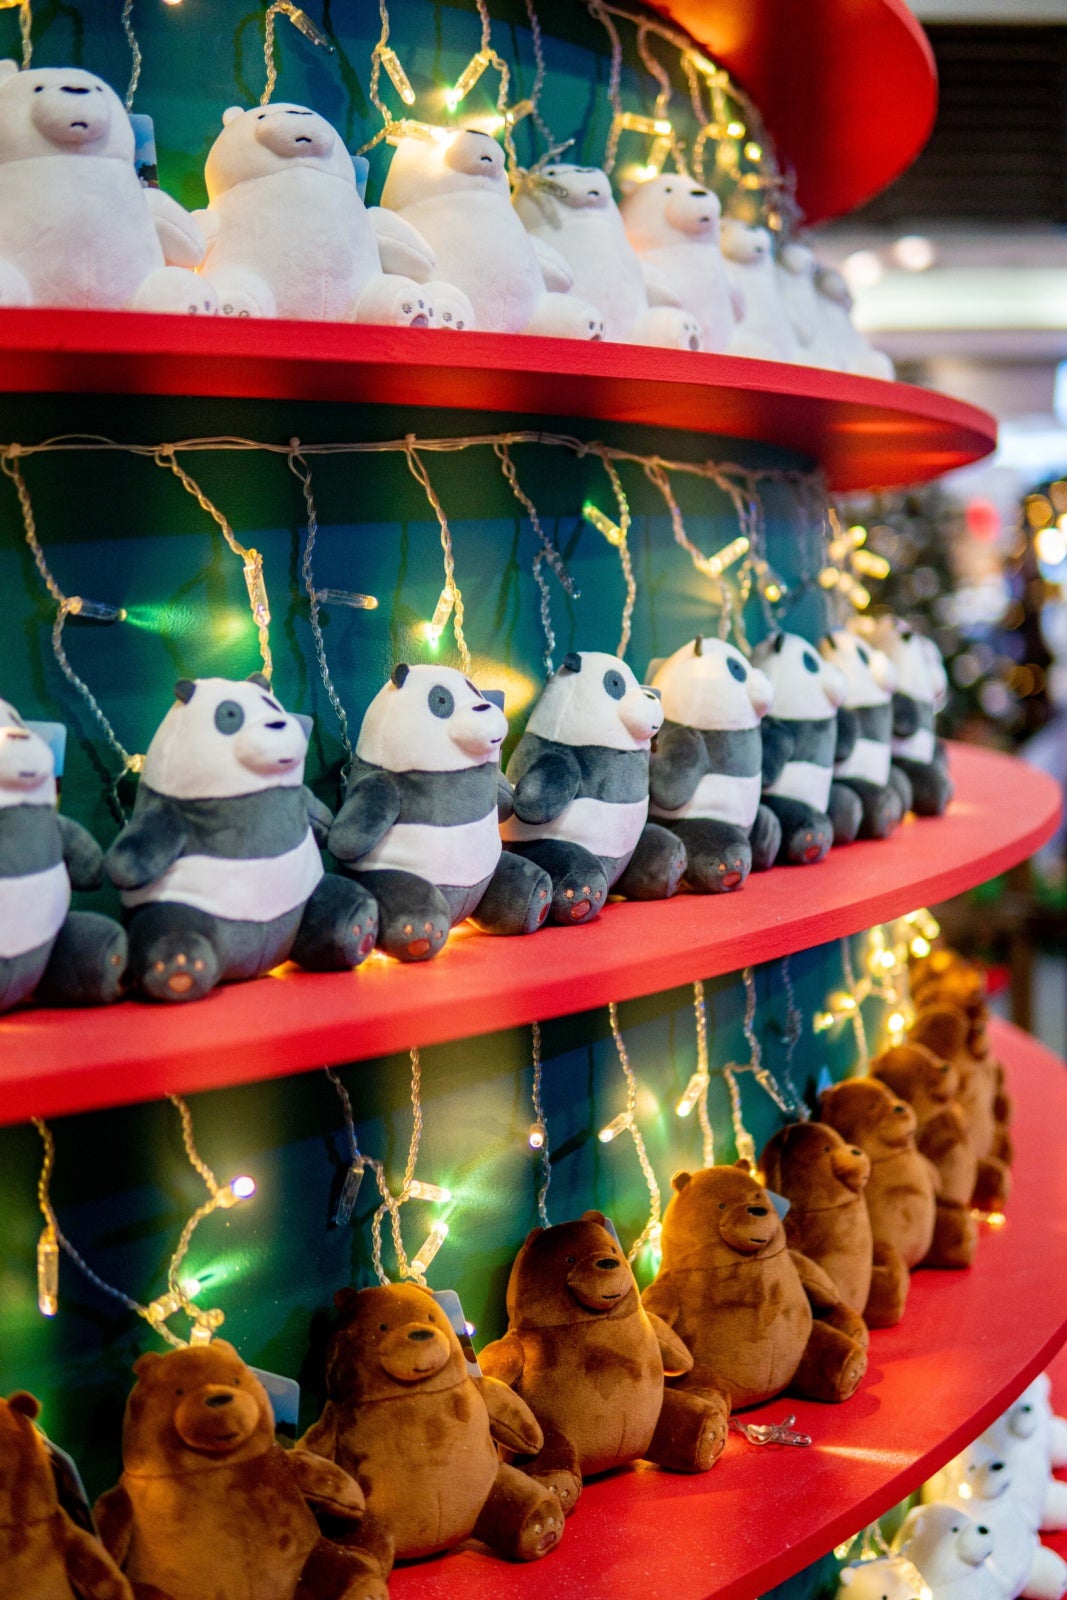 [TEST] A 'We Bare Bears' Themed Christmas in Malaysia That's Breaking a Nationwide Record?! Here's What We Know! - WORLD OF BUZZ 22